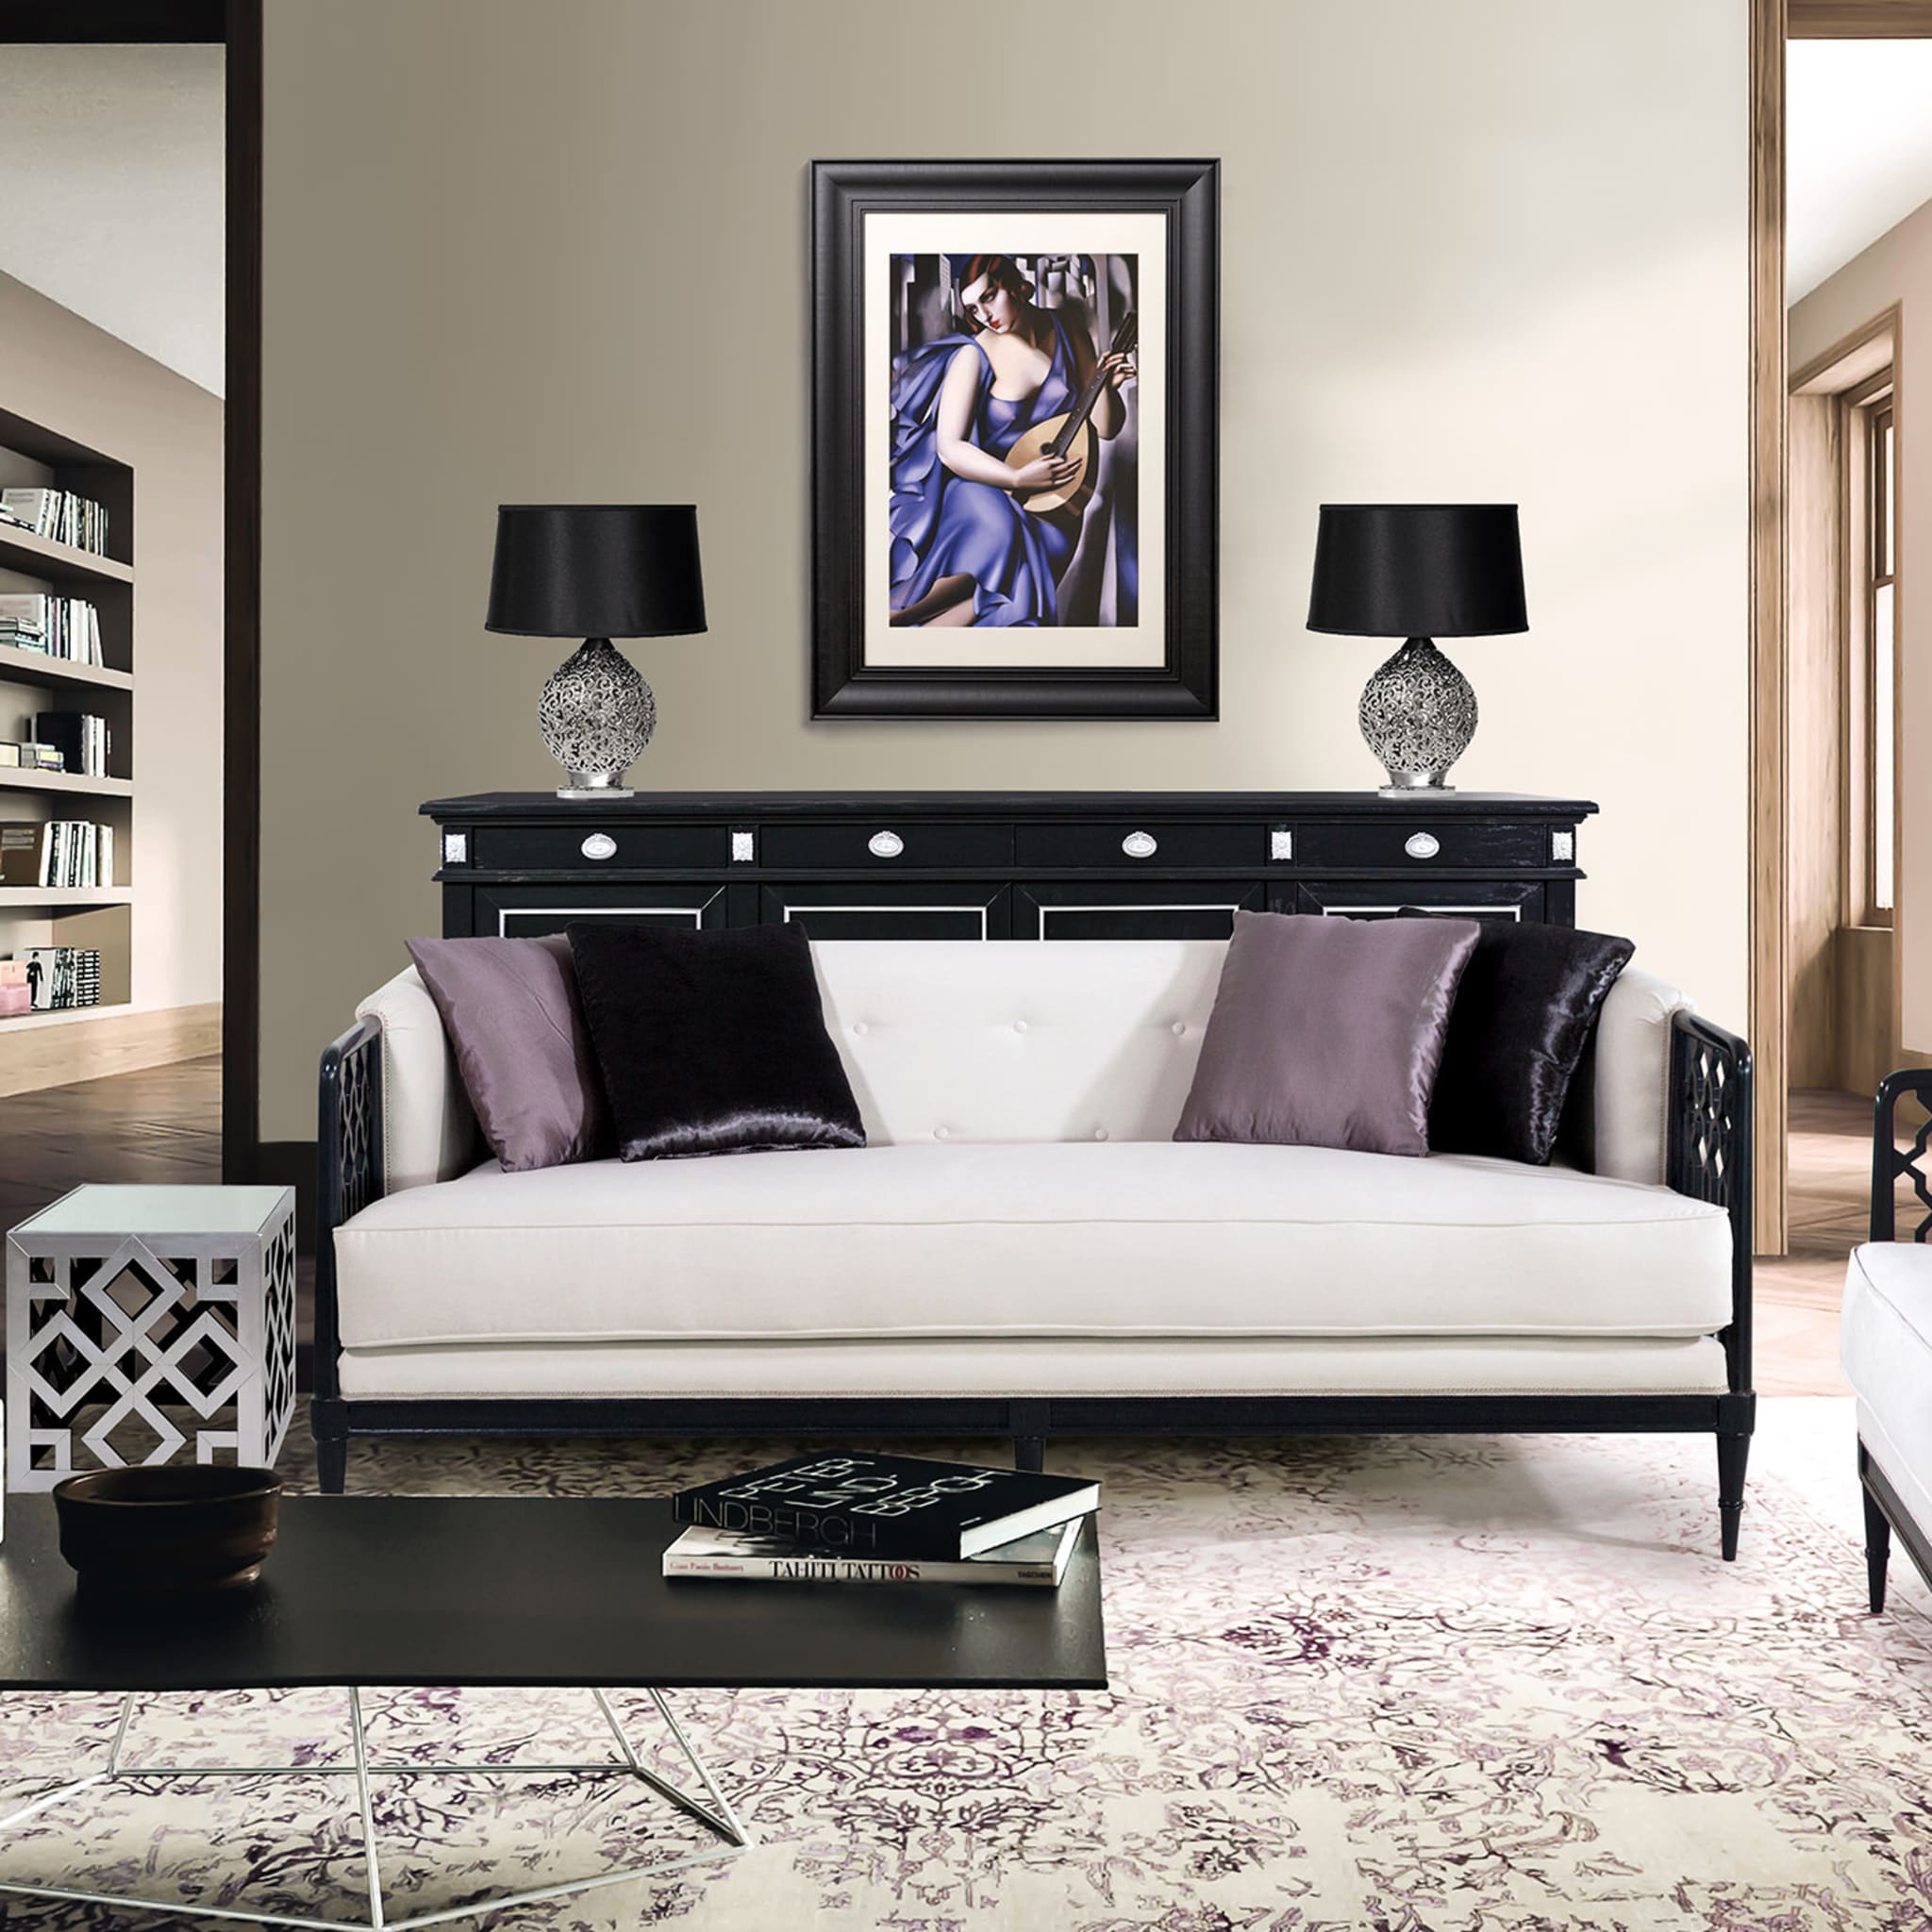 Colonial-Style Black-And-White Sofa - Alternative view 2